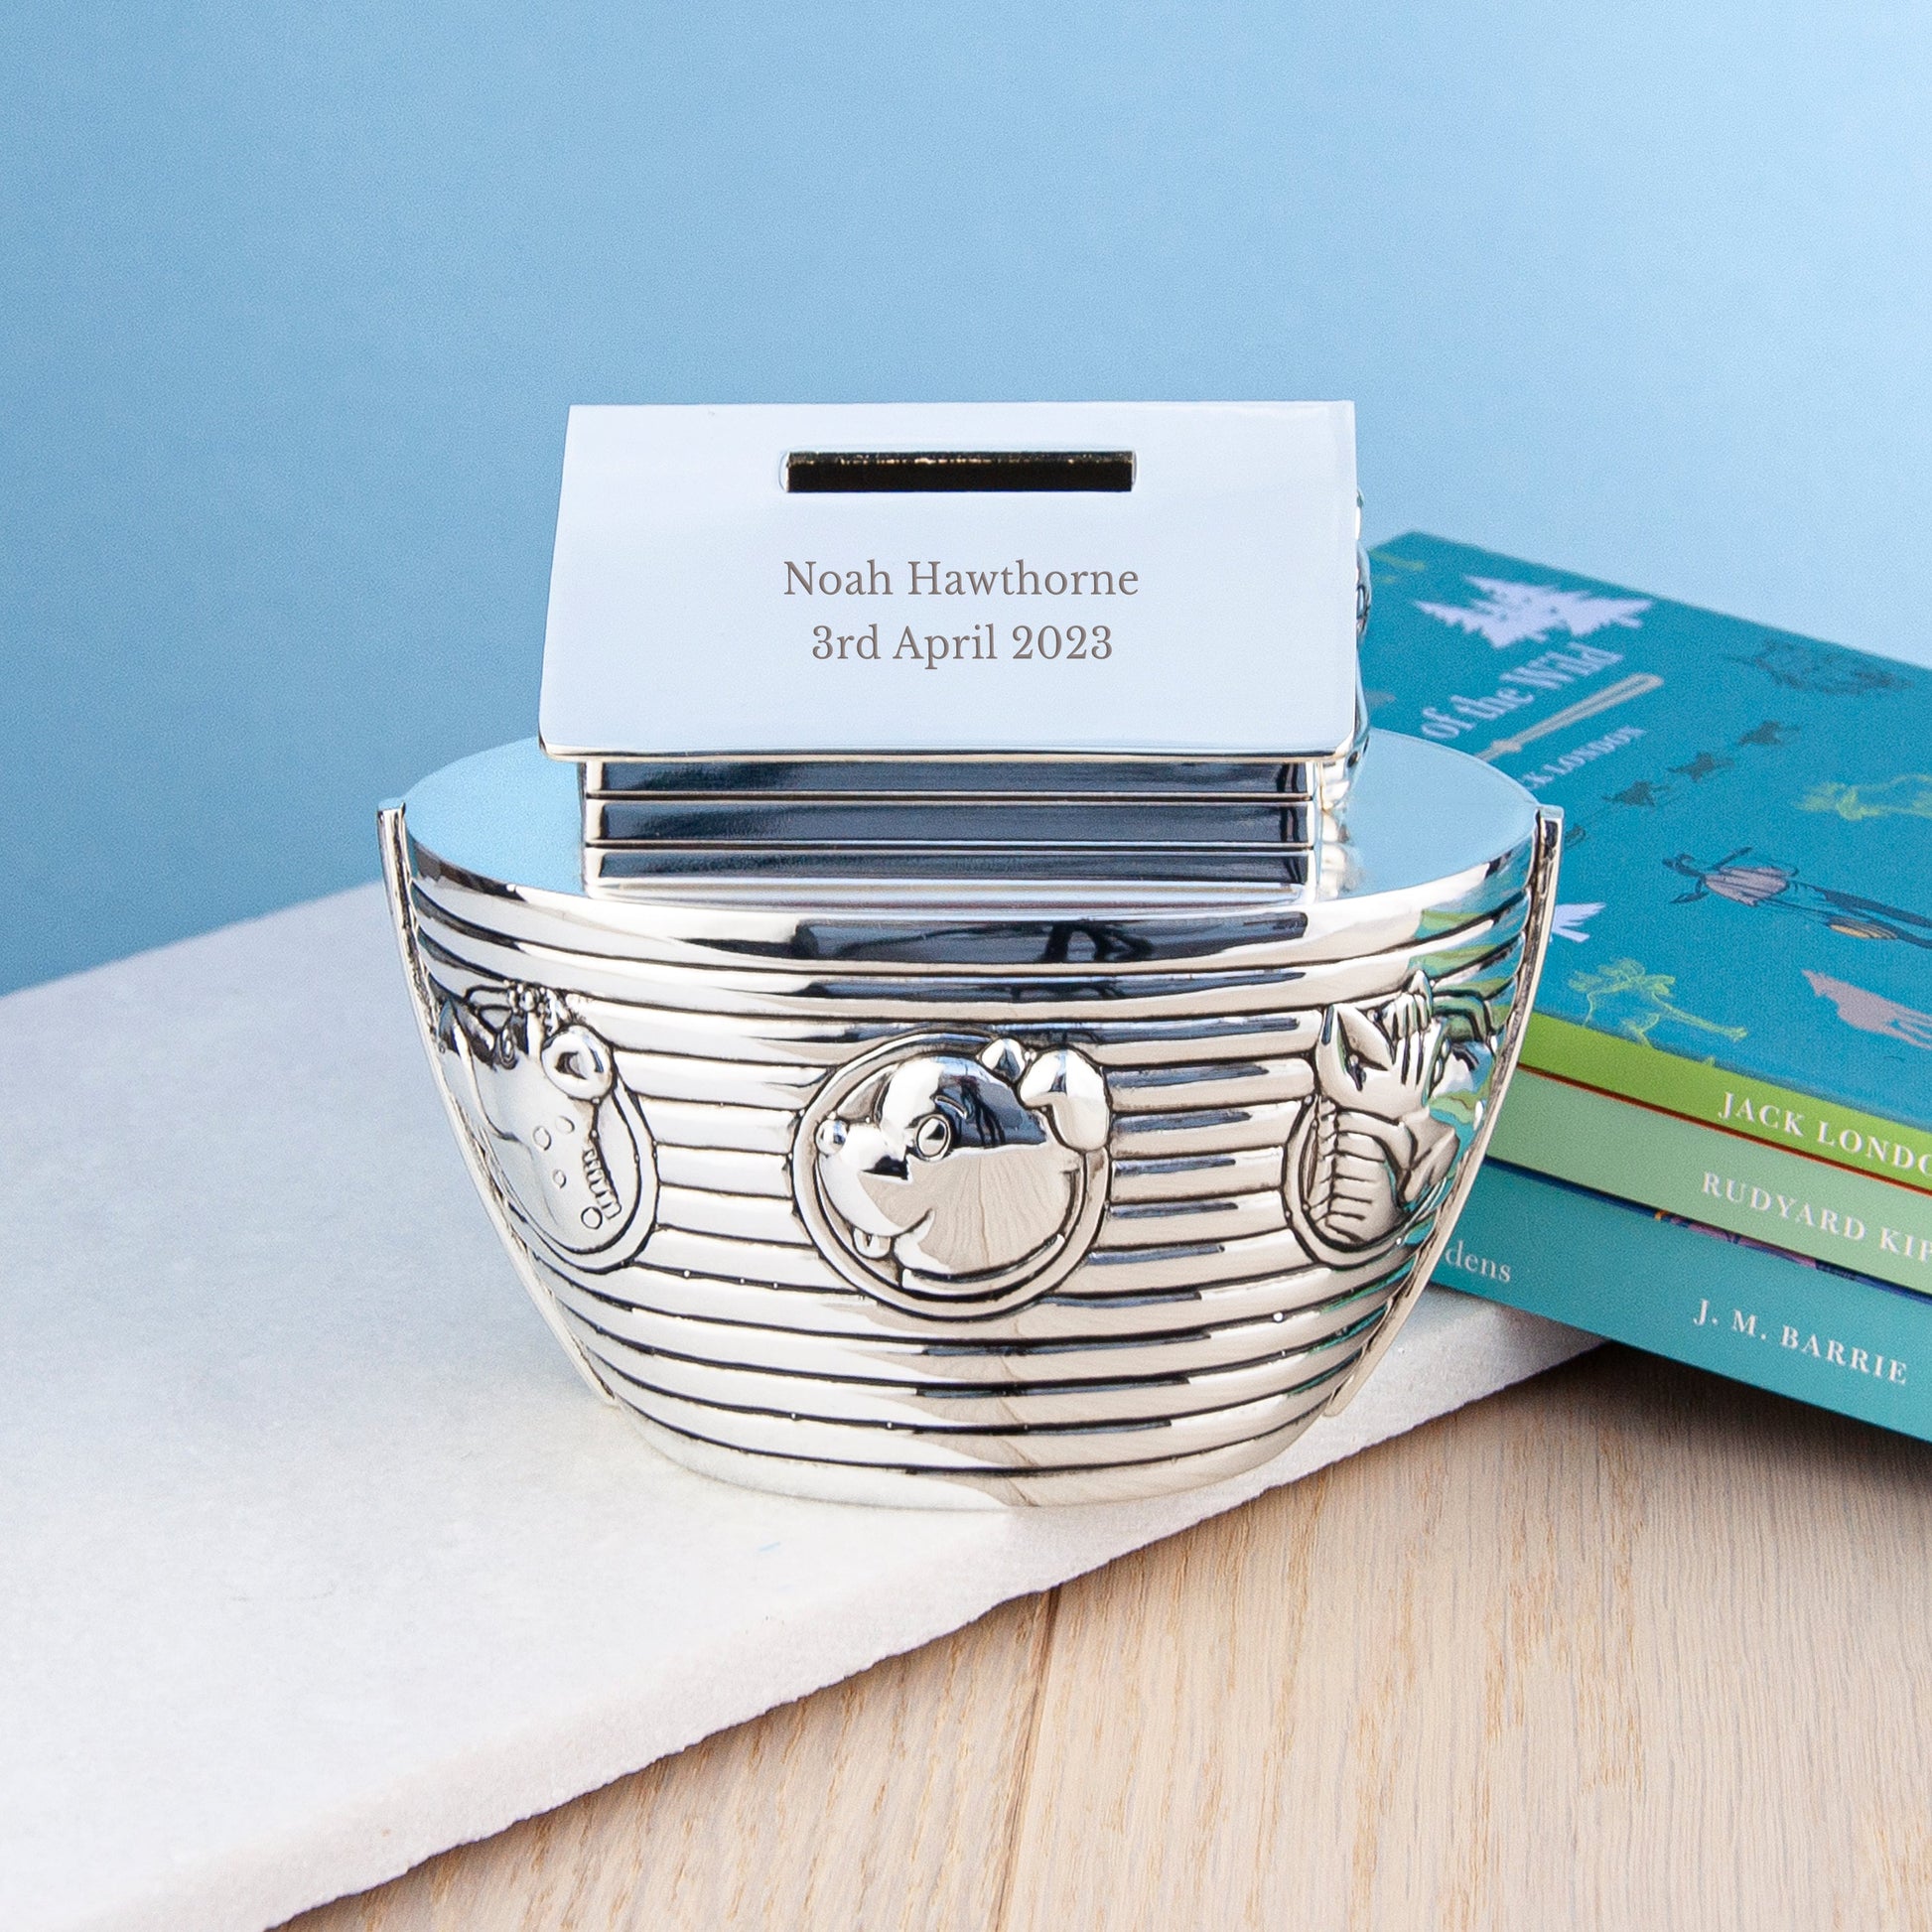 Personalized Money Boxes - Personalized Silver Plated Noah’s Ark Money Box 